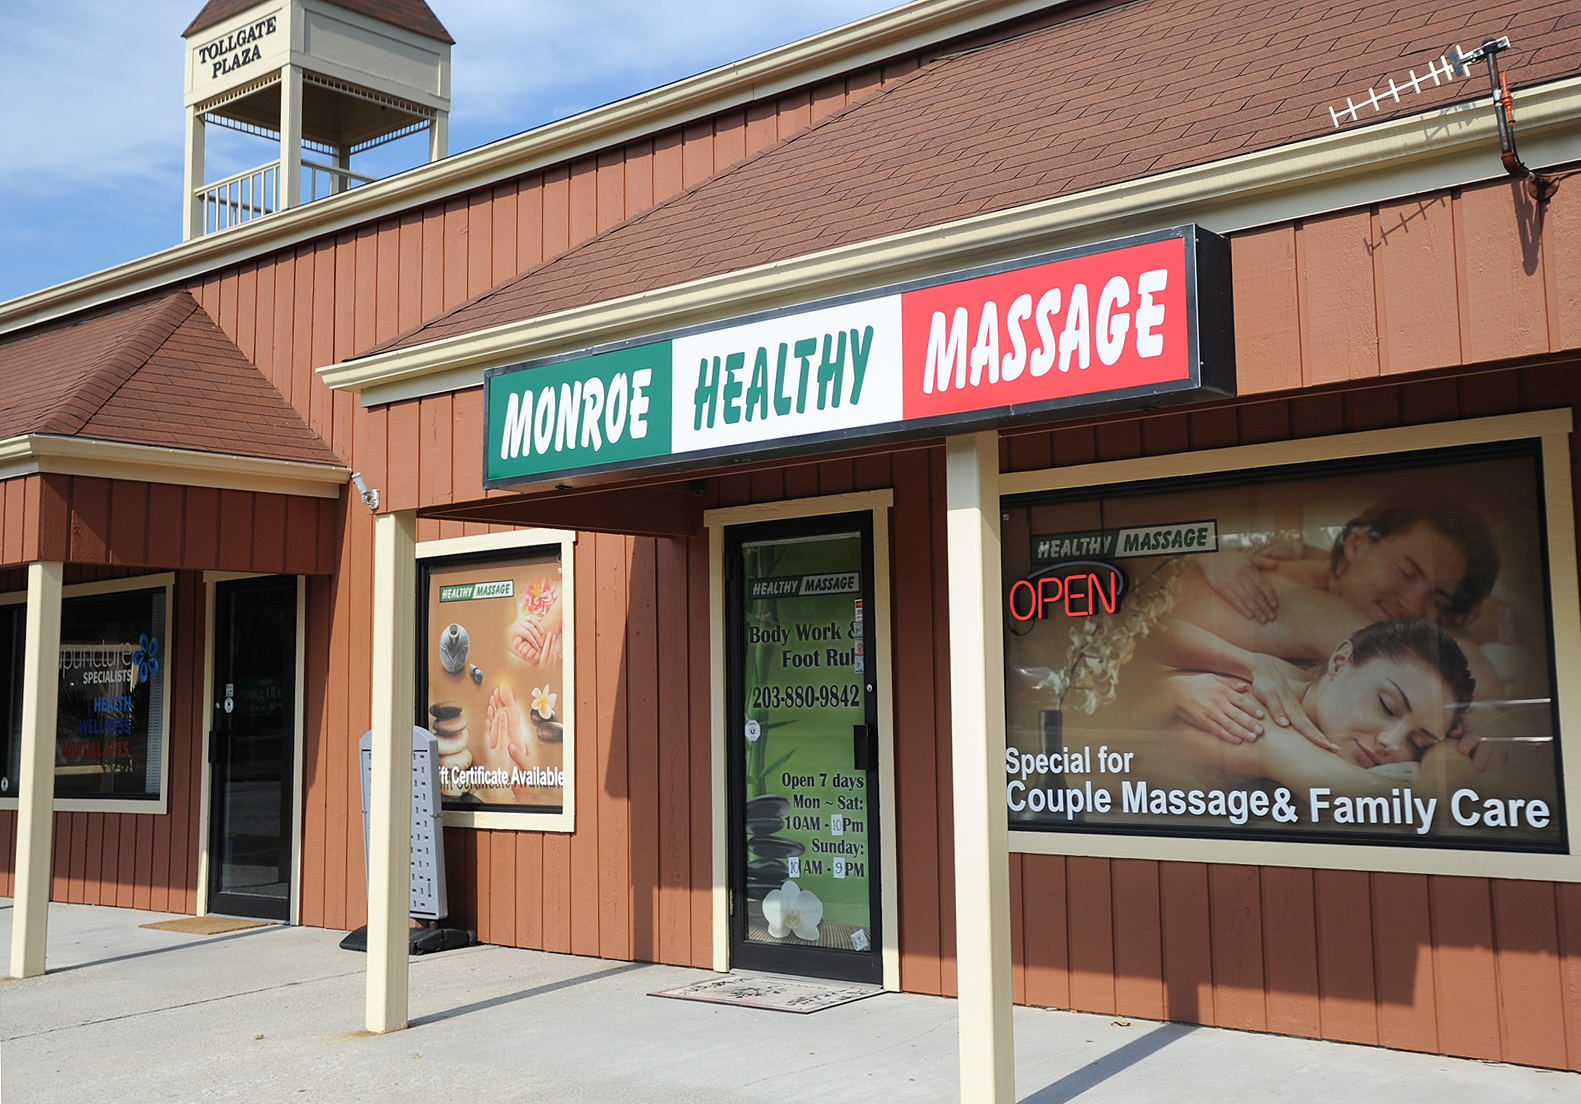 Massage parlor rubs Monroe residents the wrong way - Connecticut Post